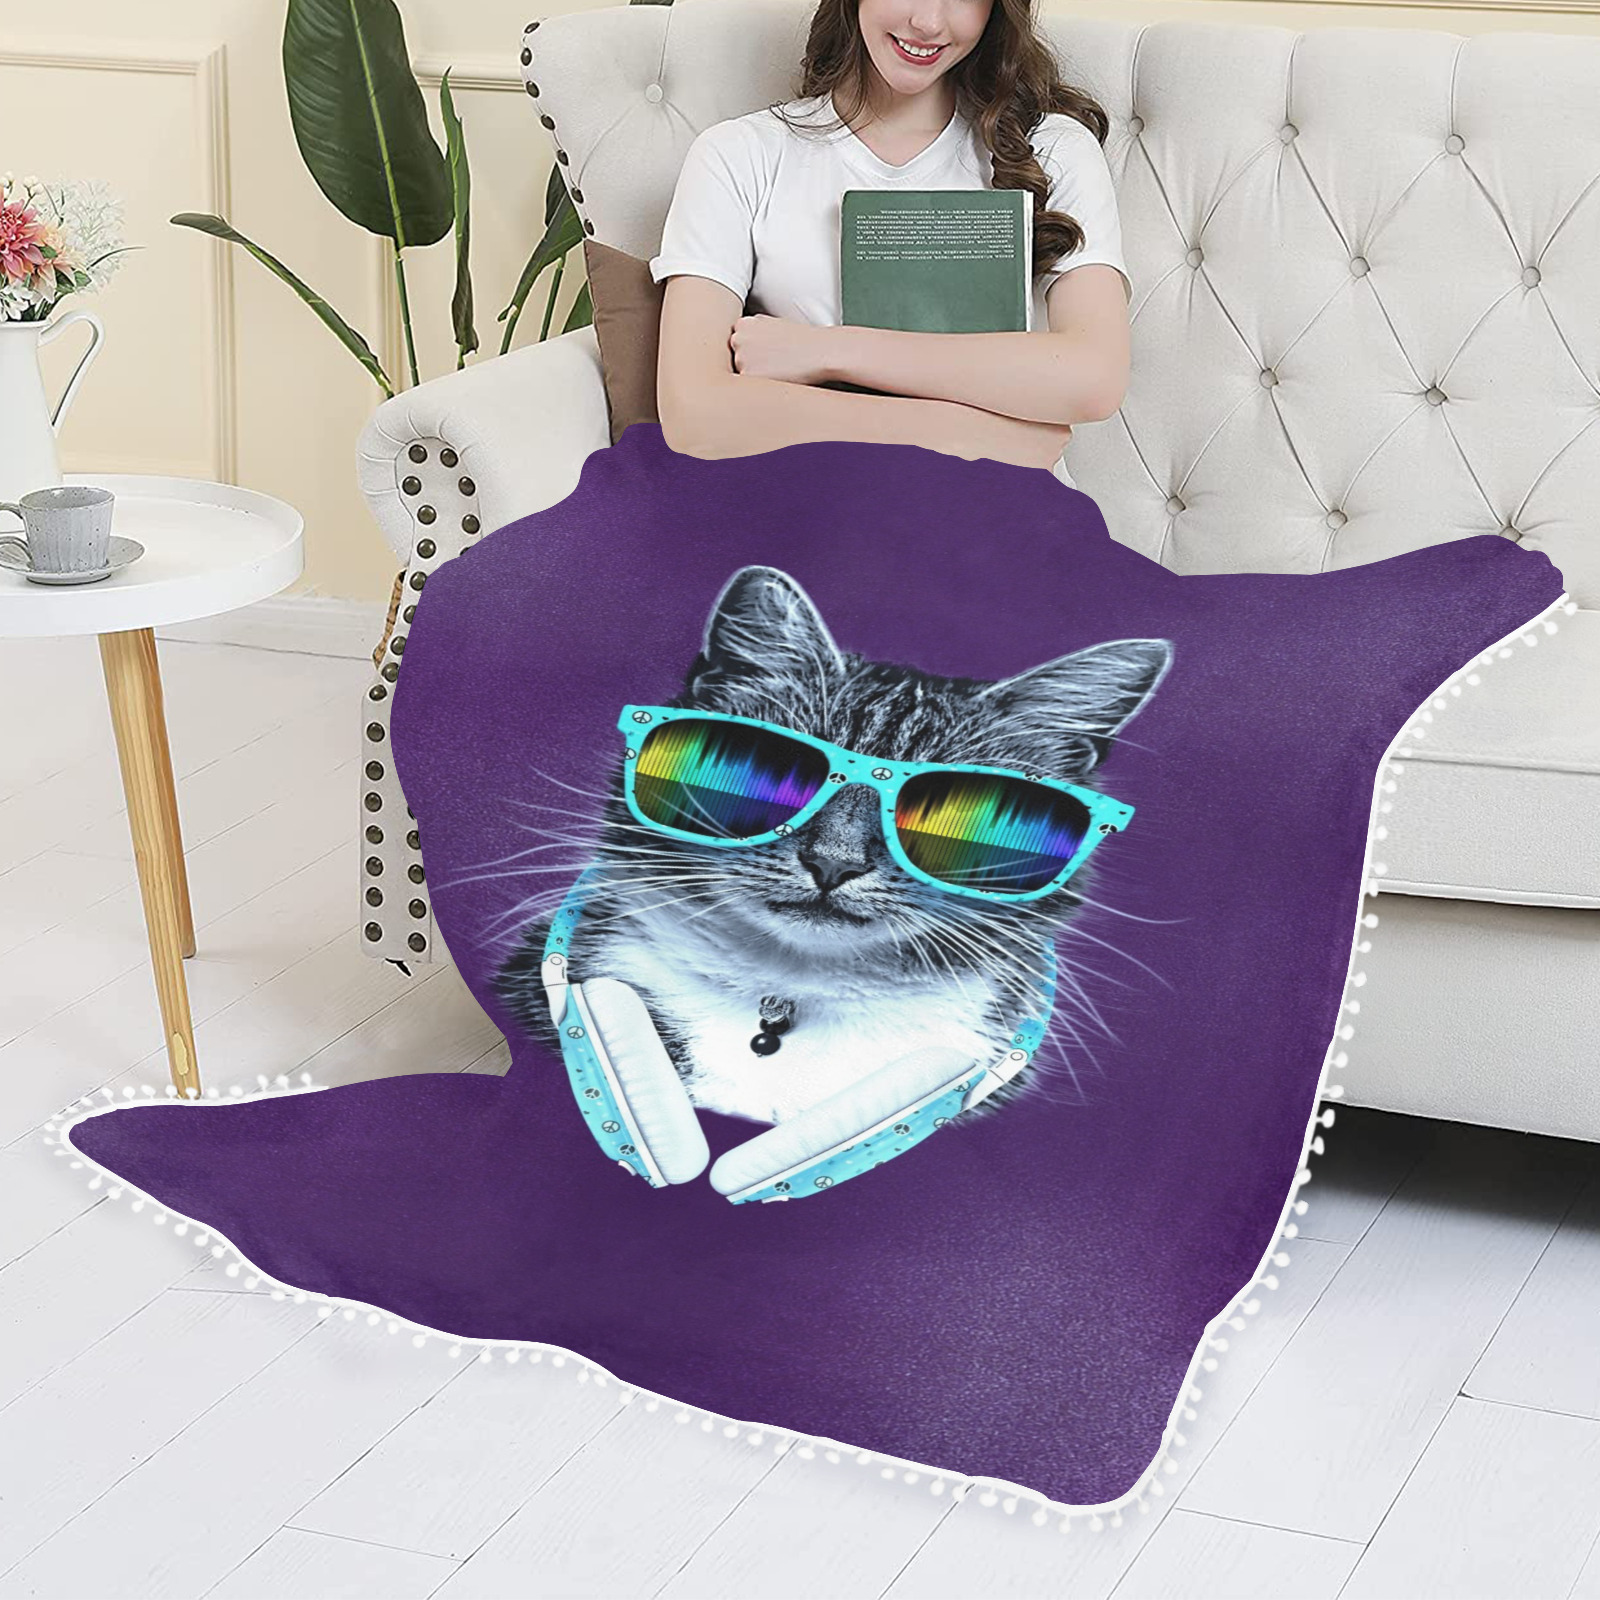 Stylish Cute Cool Cat with glasses and headphones Pom Pom Fringe Blanket 60"x80"